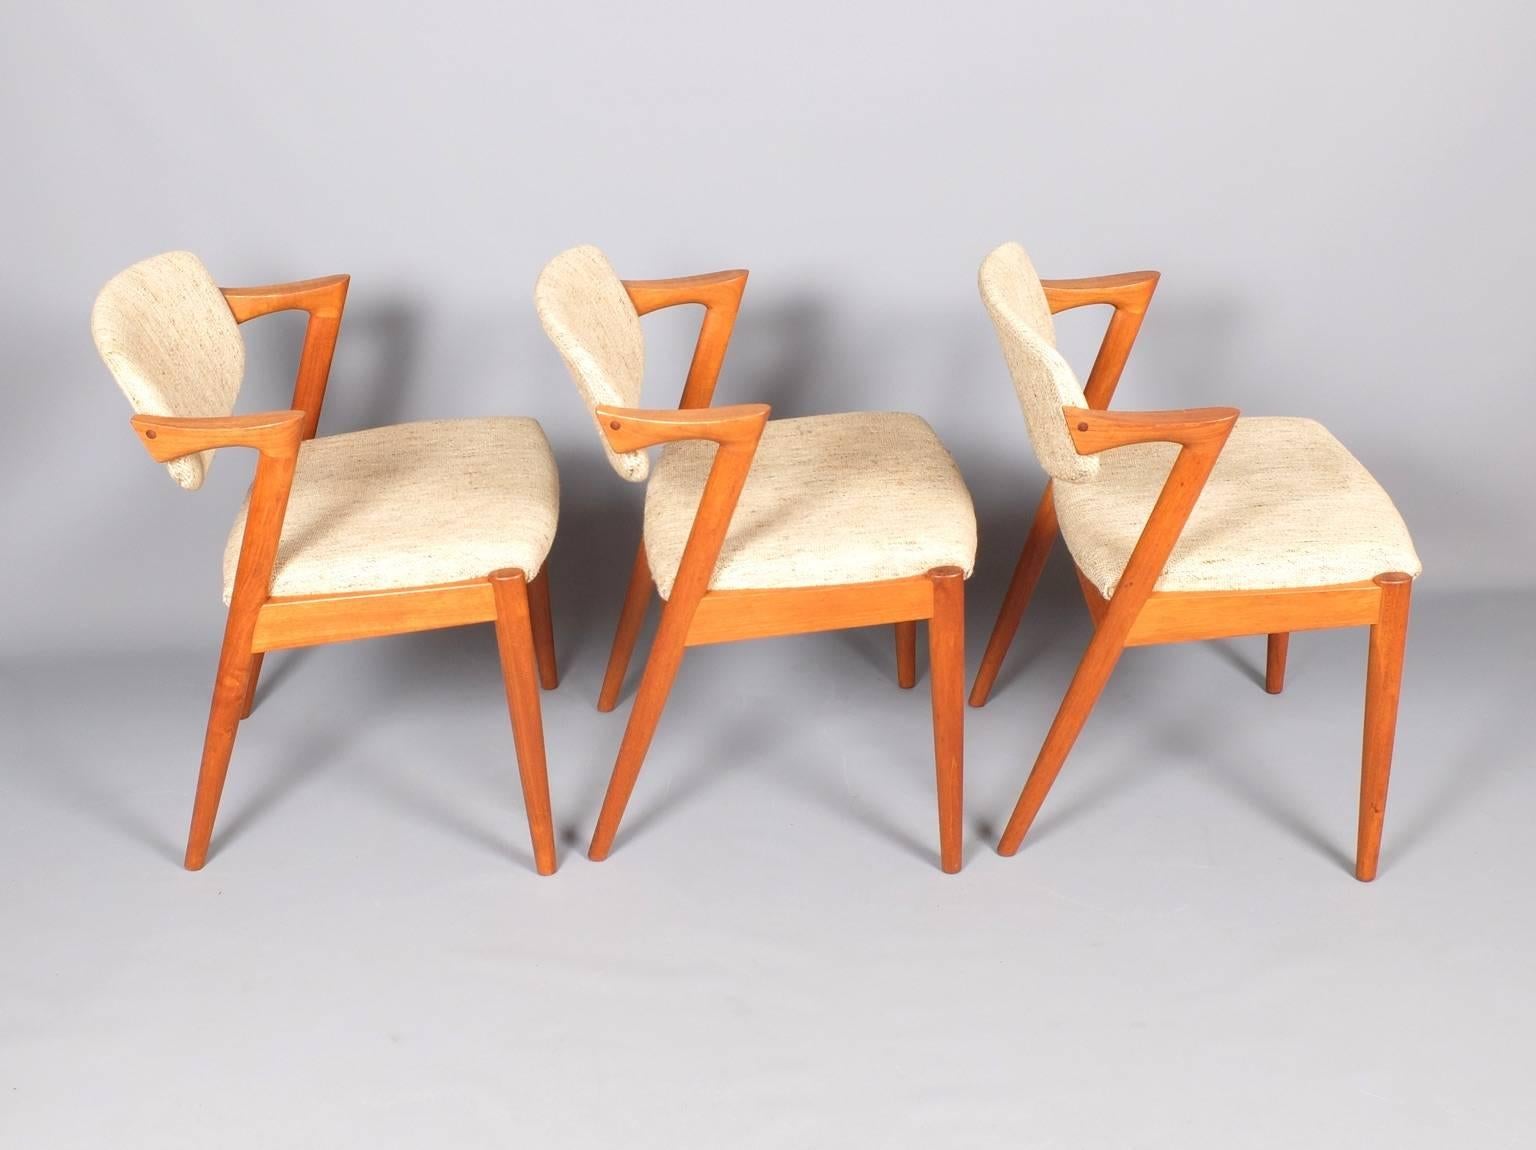 A set of six teak dining chairs designed by Kai Kristiansen in the 1960s and manufactured by V Schou Andersen. Also known as the 'Z' chair they feature a tilting back which makes them very comfortable. The teak frames are in very good condition and